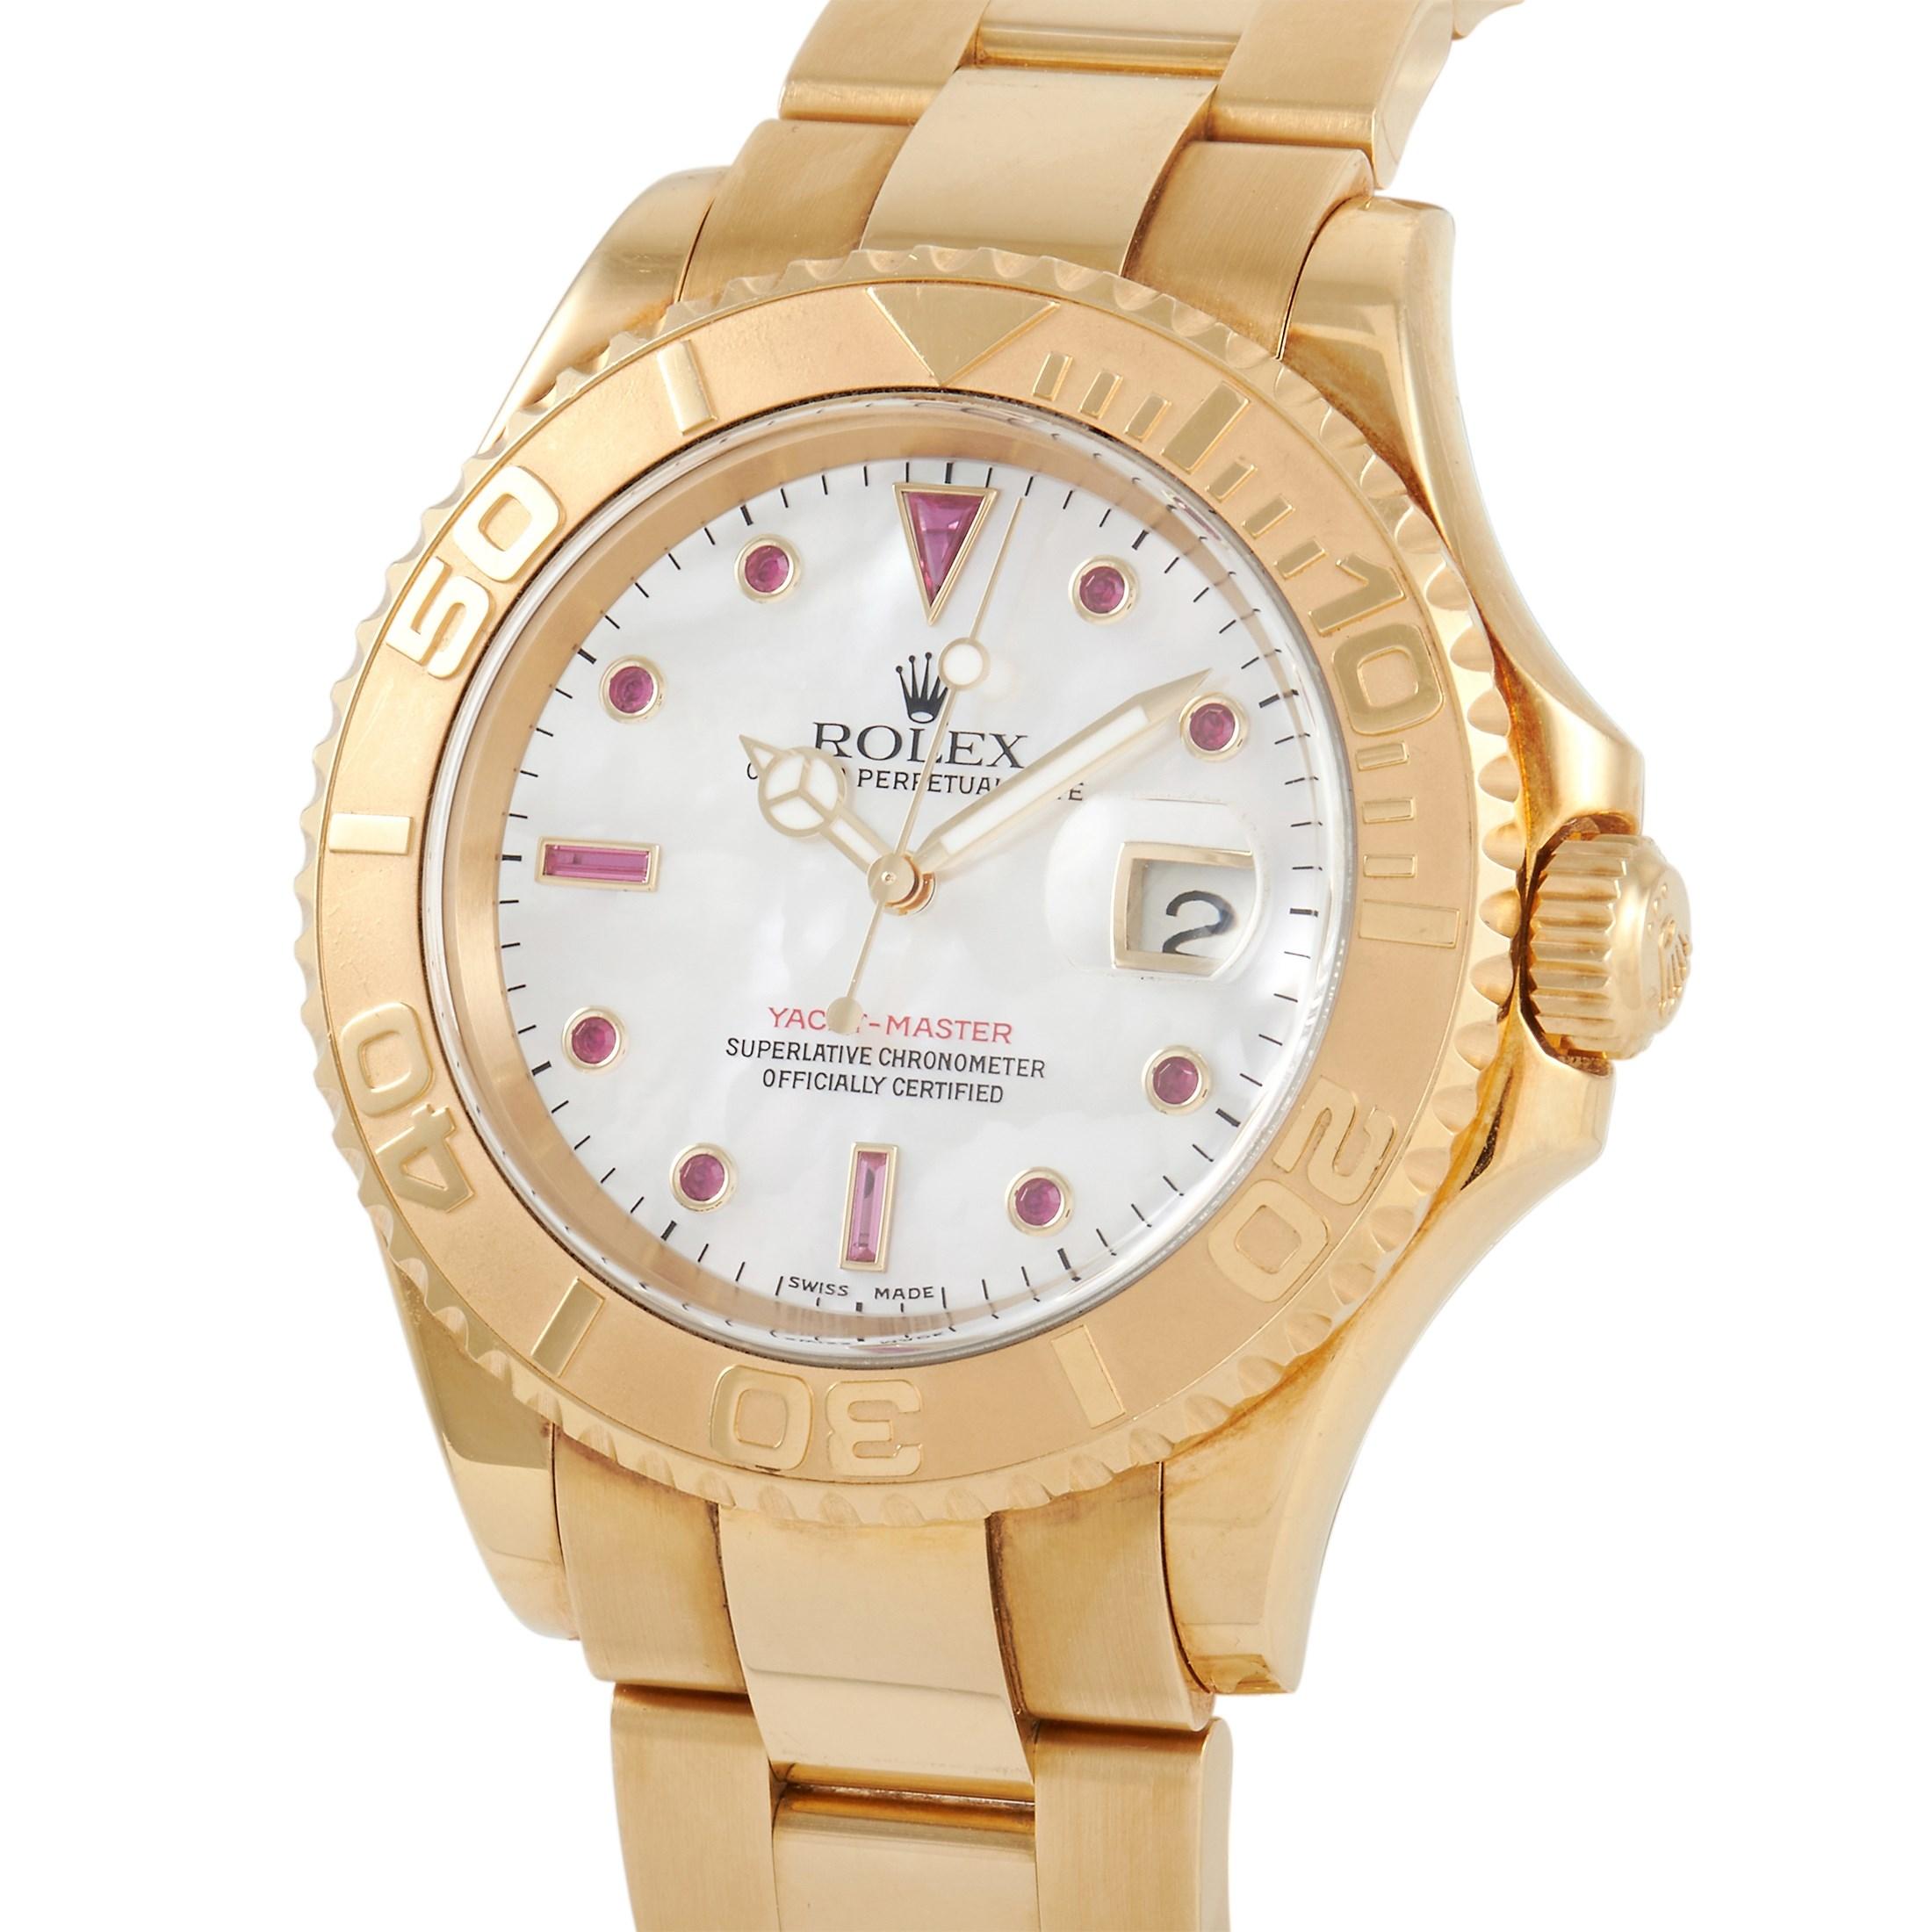 The Rolex Yacht-Master Chronometer Watch, reference number 16628, is an impeccably crafted luxury piece. Elegantly accented by shimmering gemstones, this timepiece’s dial is unlike anything you have ever experienced. 

This watch’s 40mm case is made